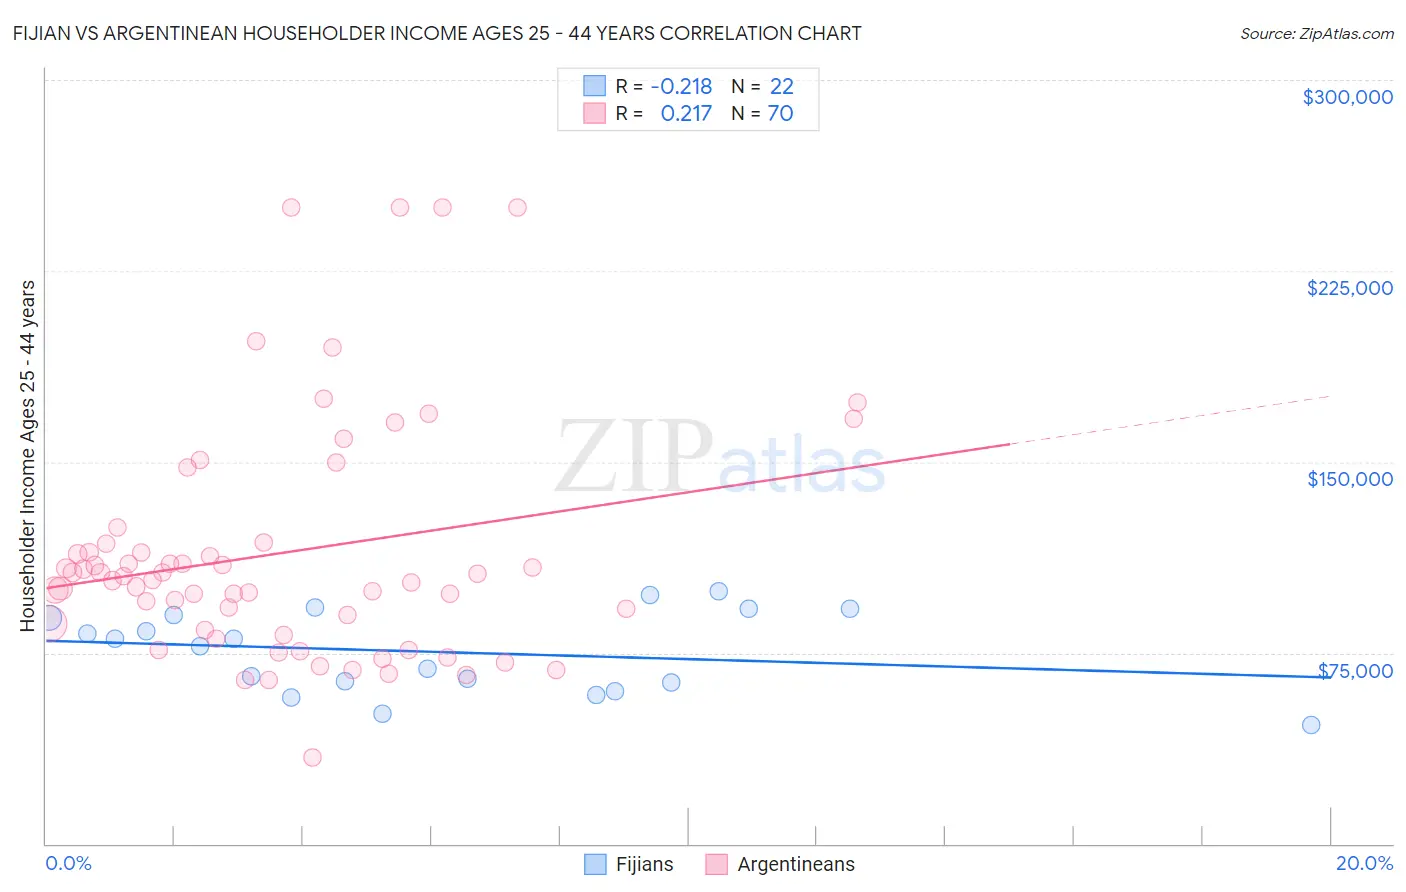 Fijian vs Argentinean Householder Income Ages 25 - 44 years